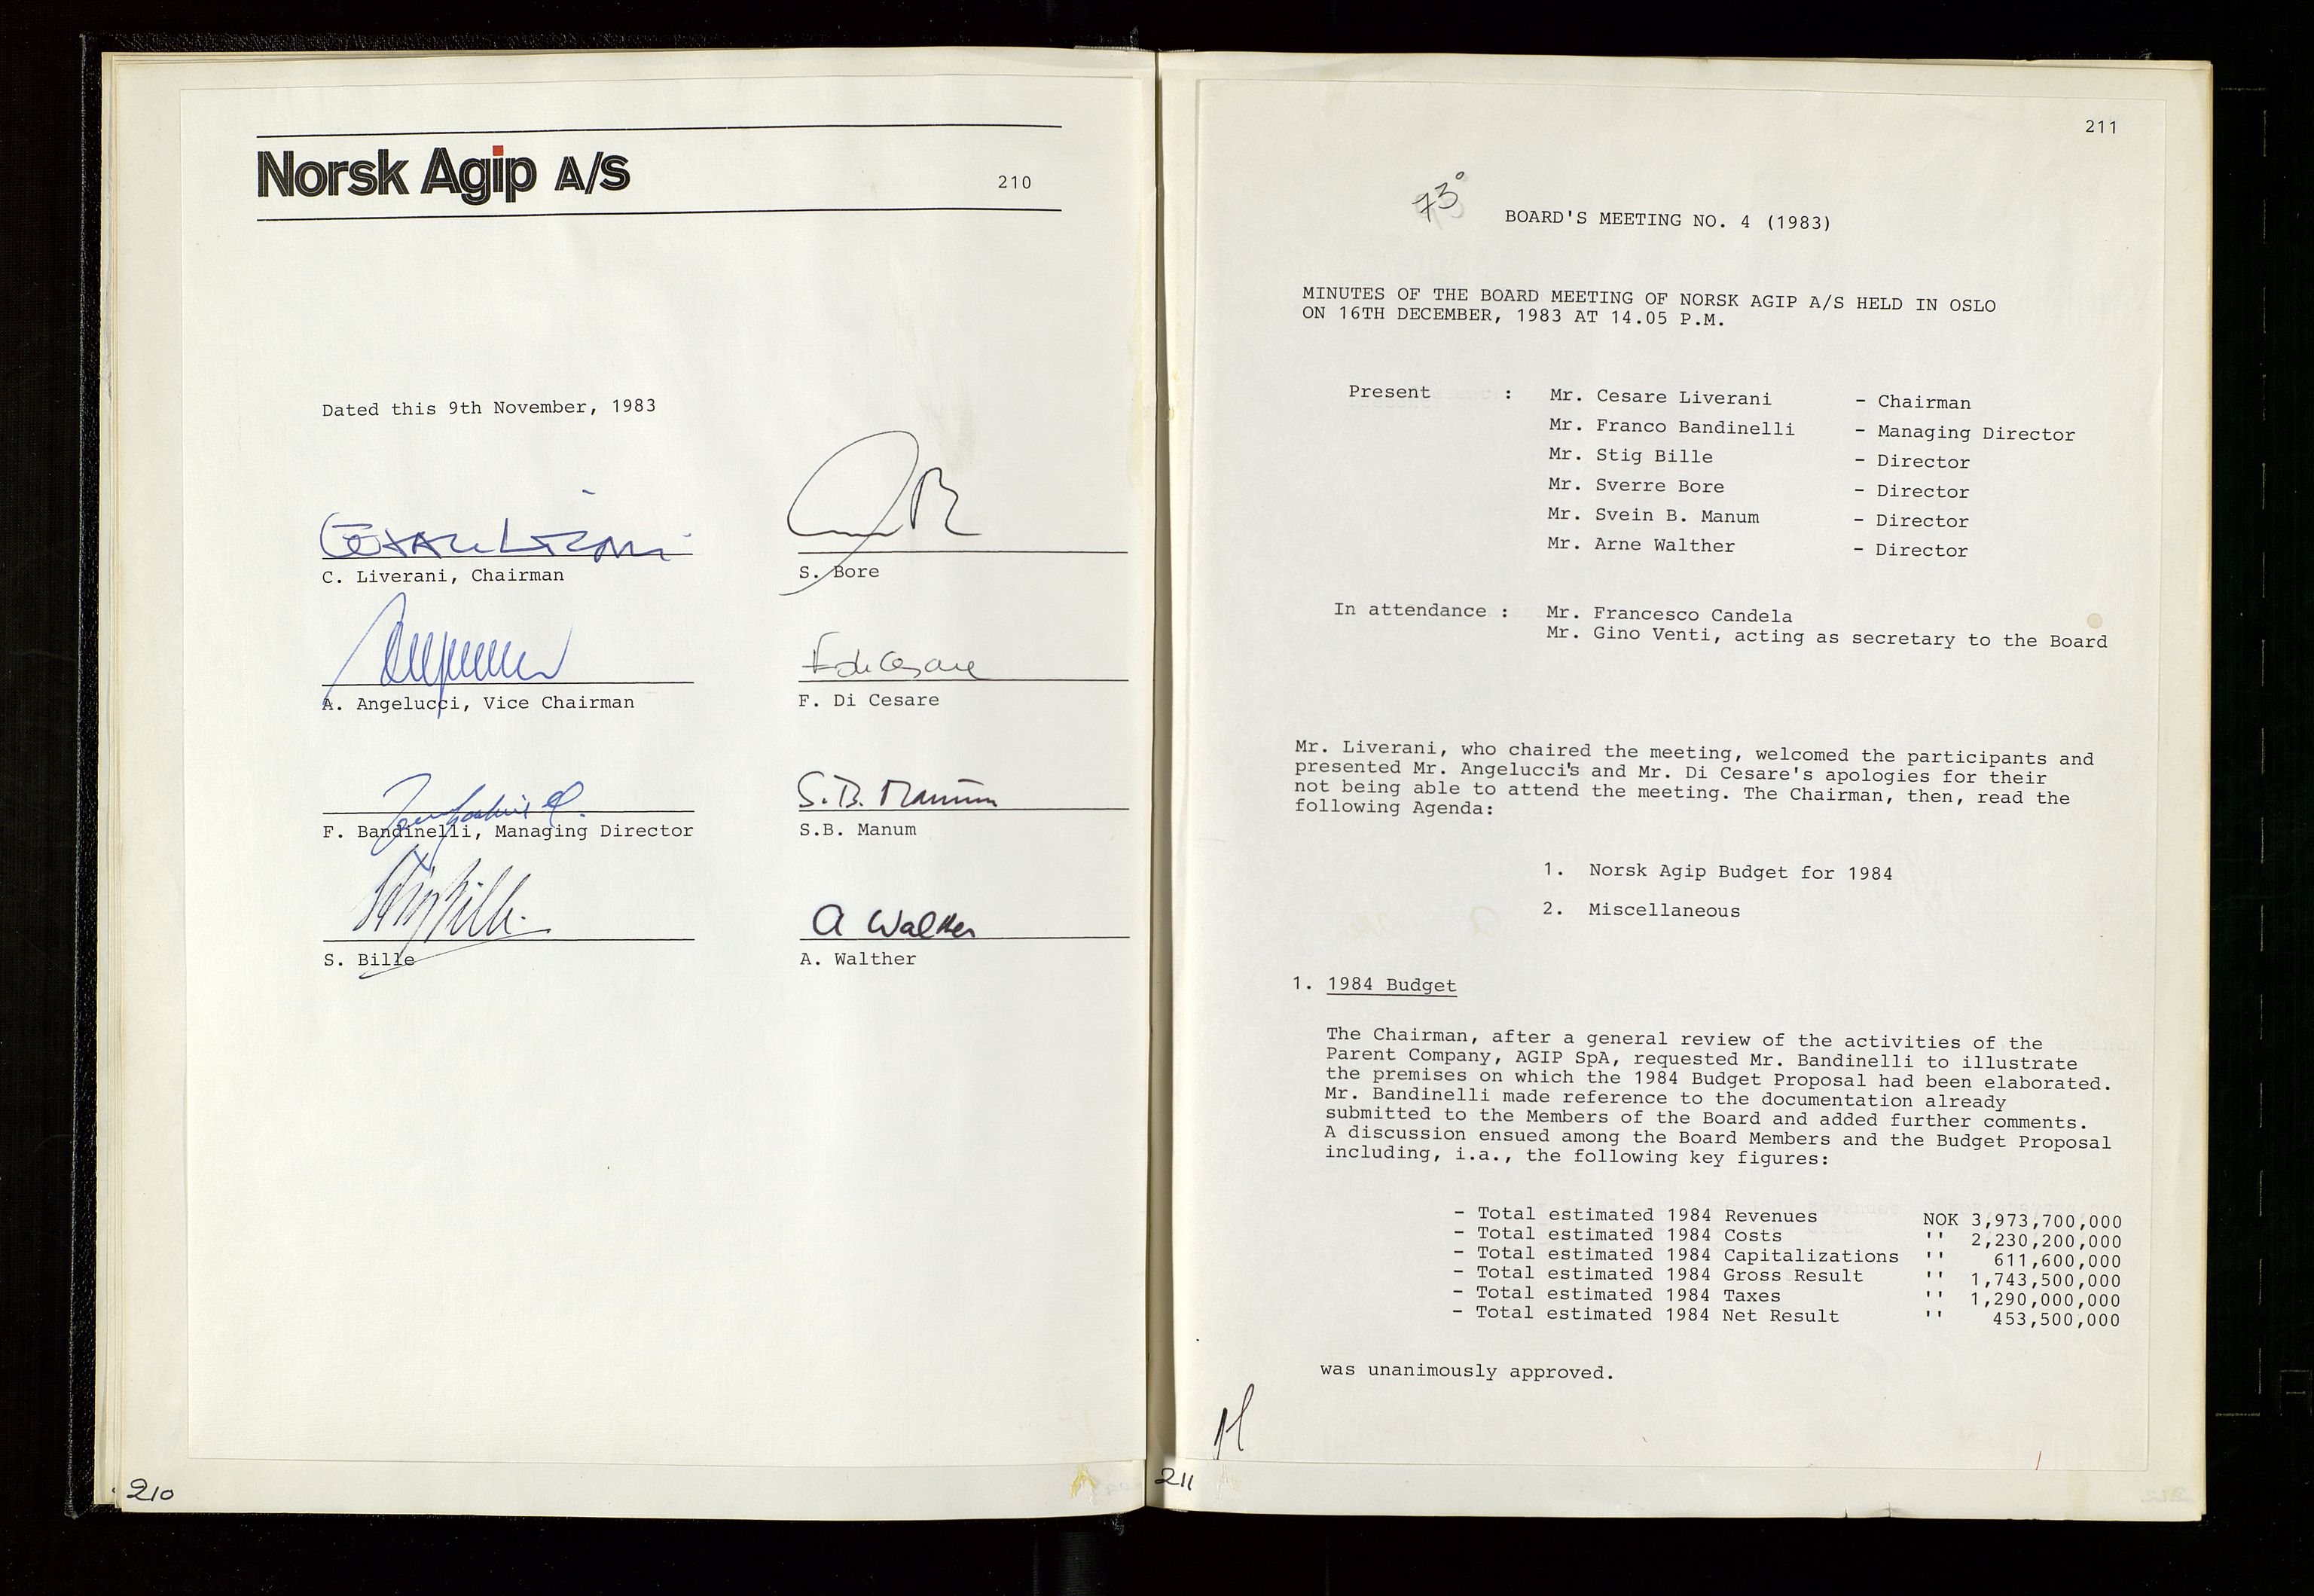 Pa 1583 - Norsk Agip AS, SAST/A-102138/A/Aa/L0003: Board of Directors meeting minutes, 1979-1983, s. 210-211